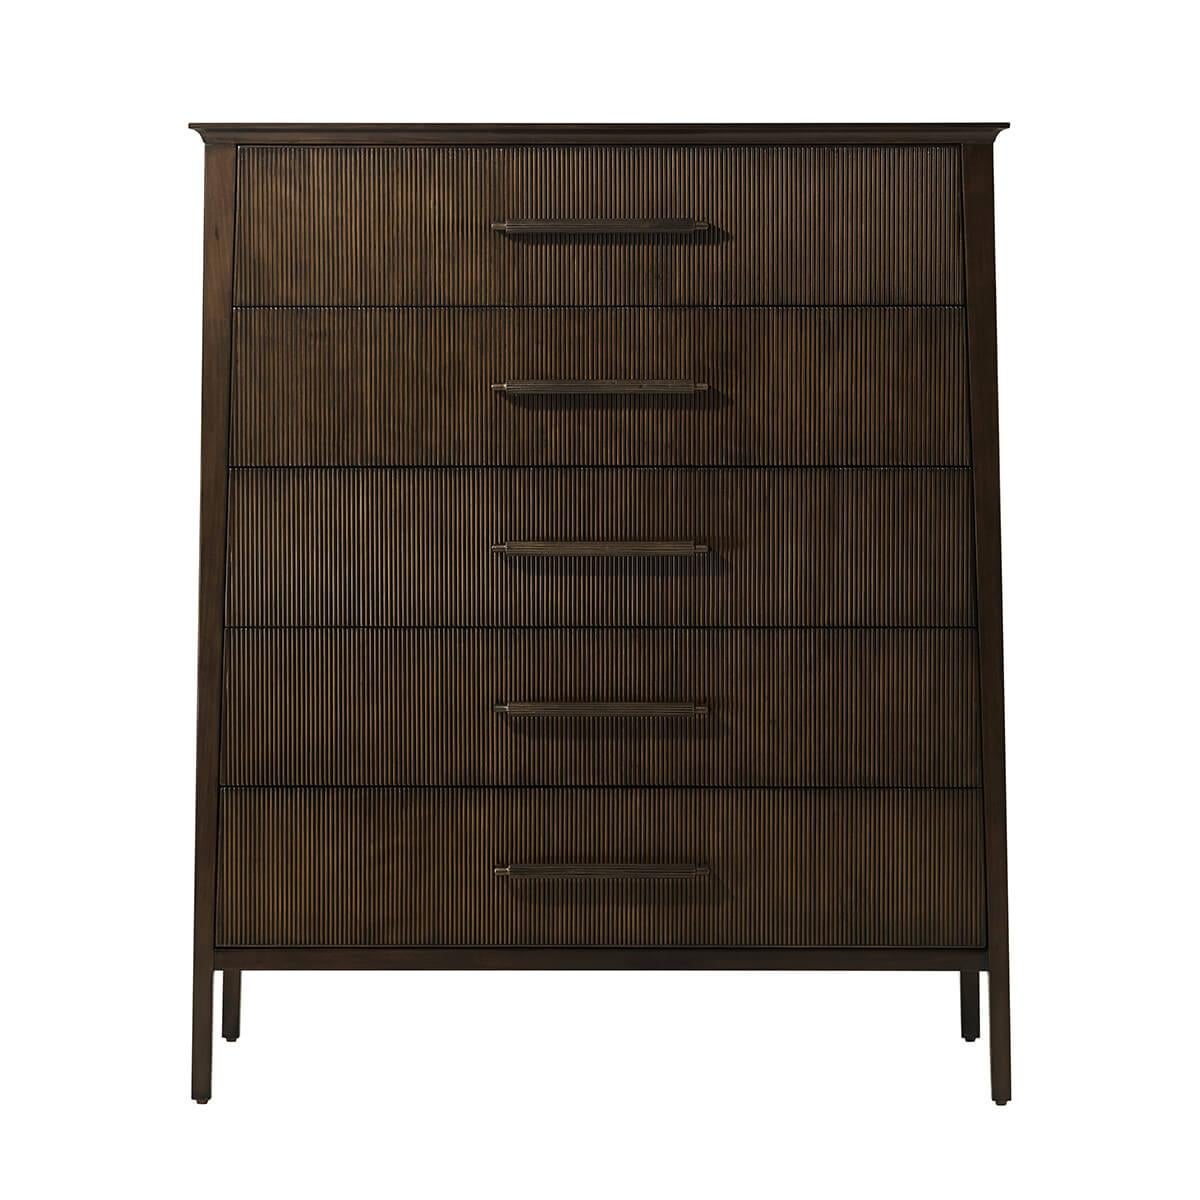 Featuring a sophisticated tapered silhouette with five reeded drawer fronts. The custom forged hardware, finished in a dark rubbed bronze, echoes the reeded details throughout.

Dimensions: 42.25